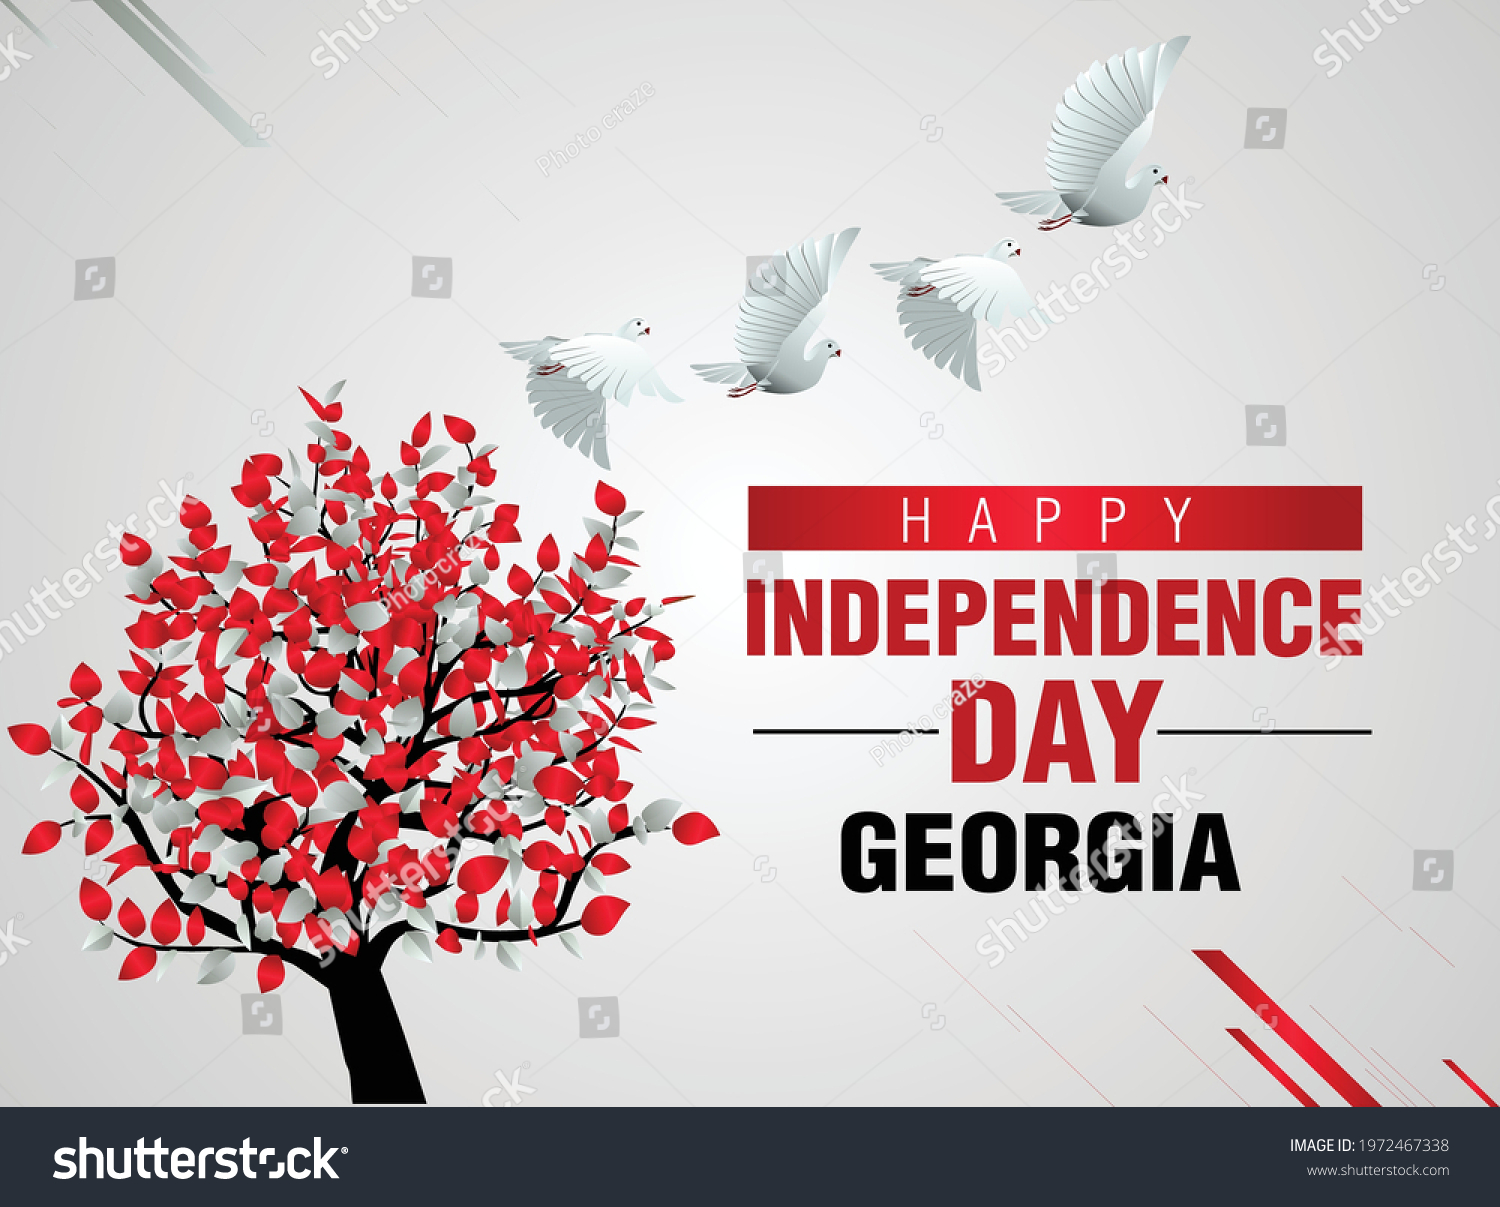 SVG of Happy Independence Day Georgia Vector Template Design Illustration. flag tree with flying pigeon svg